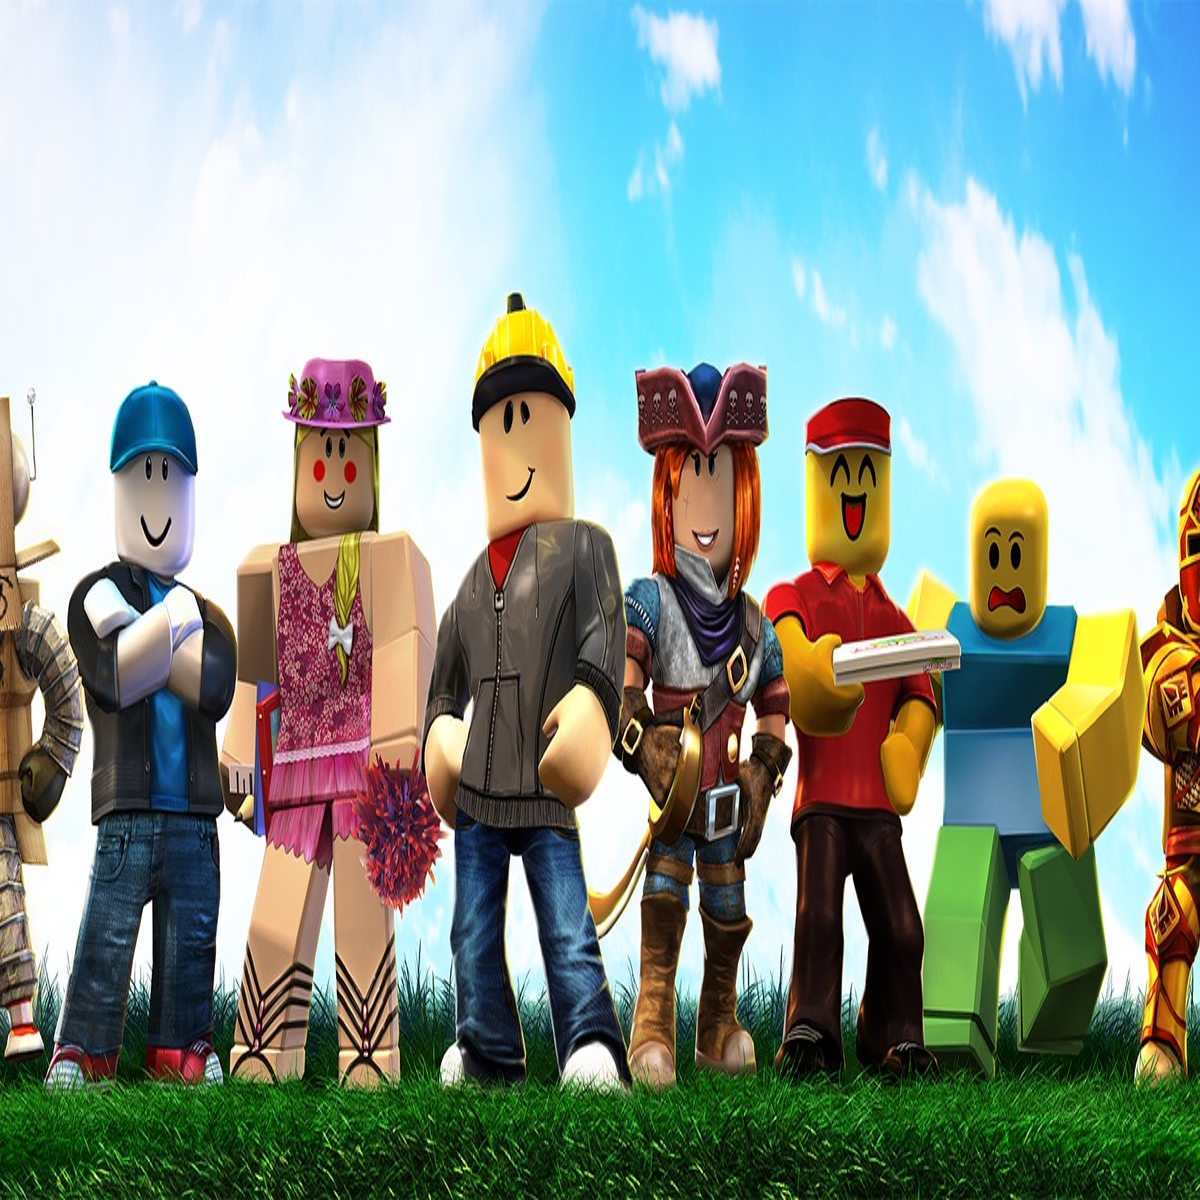 Leaked Roblox documents detail Chinese censorship concessions